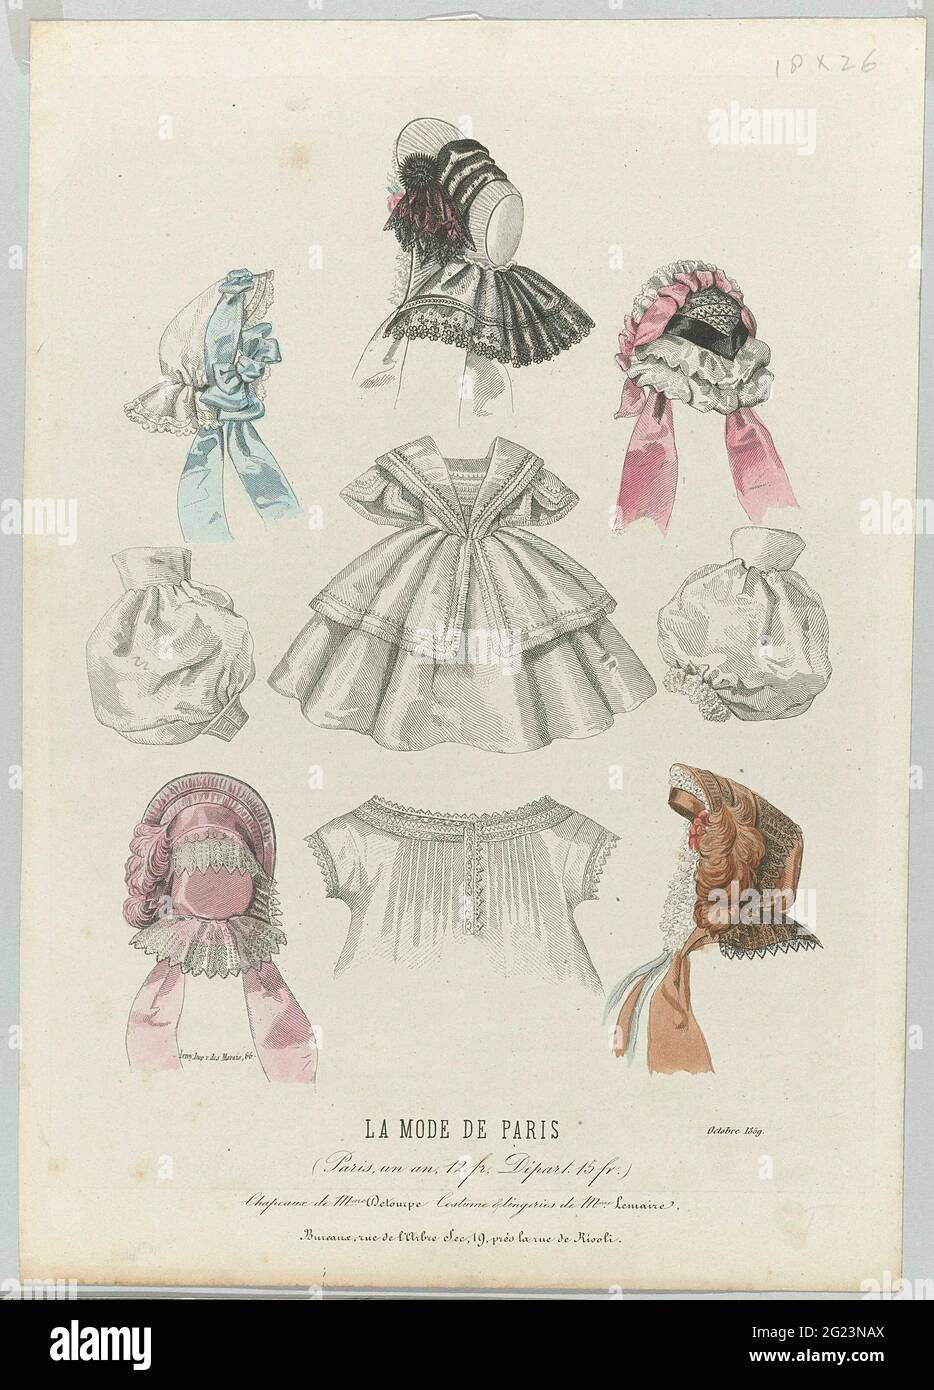 La Mode de Paris, Octobre 1859: Chapeaux de Mme Detourp (...). Five  different hats with stretch ribbons, a dress, undershirt (chemise) and two  loose puffing under-sleeves. According to the caption: hats from